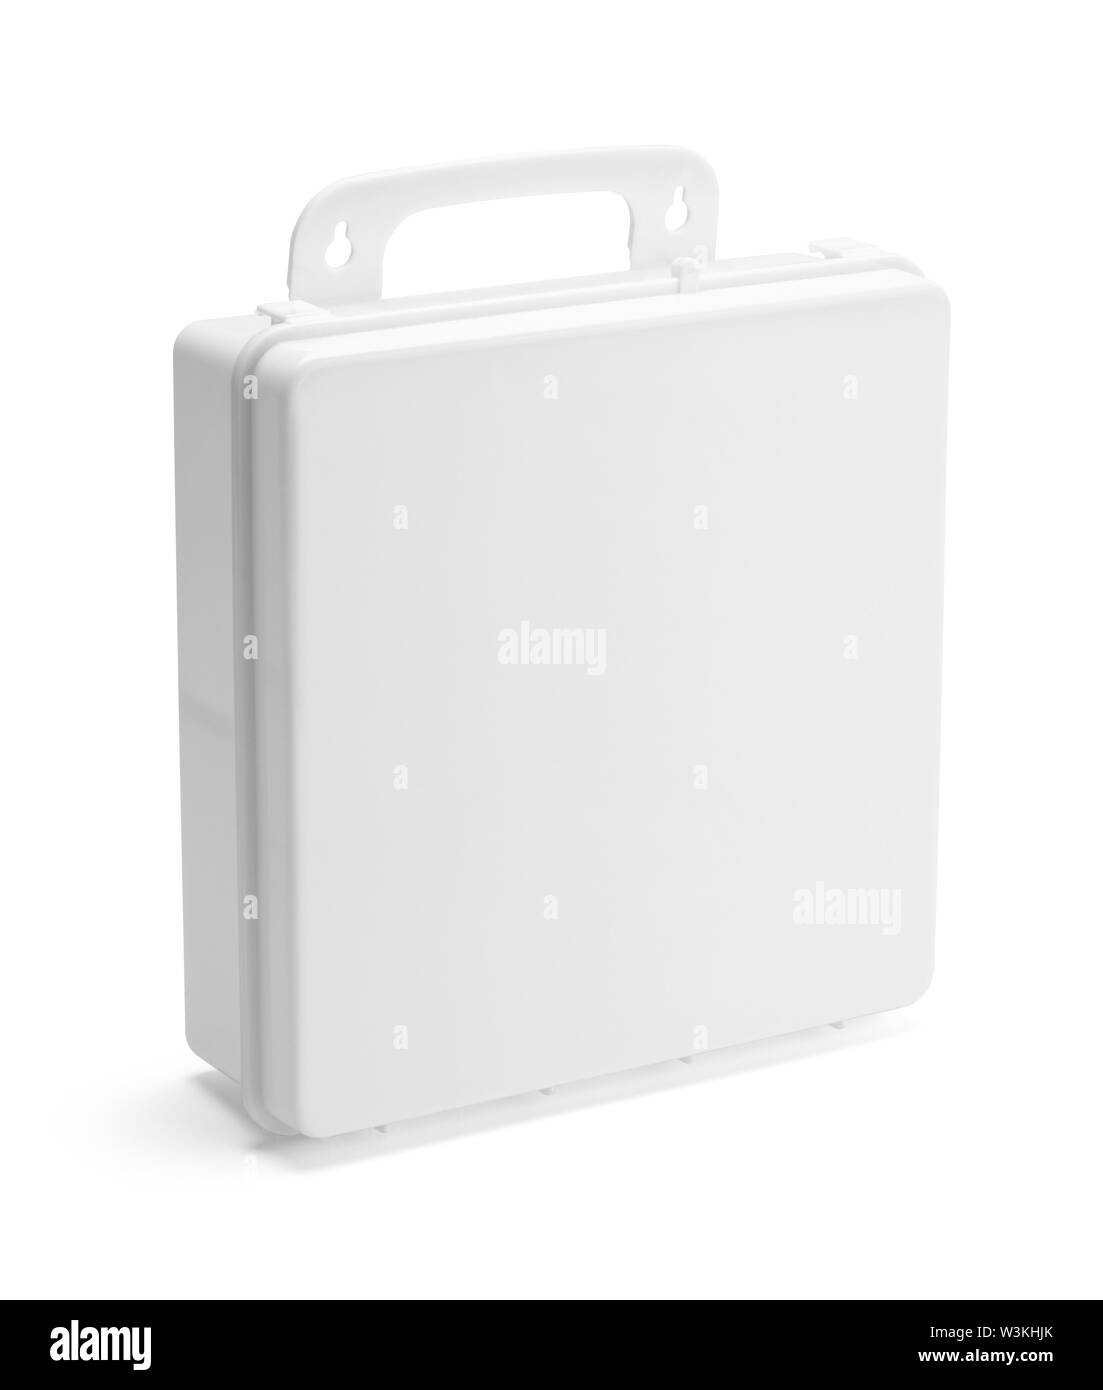 Plastic Supply Box Front View Isolated on White Background. Stock Photo